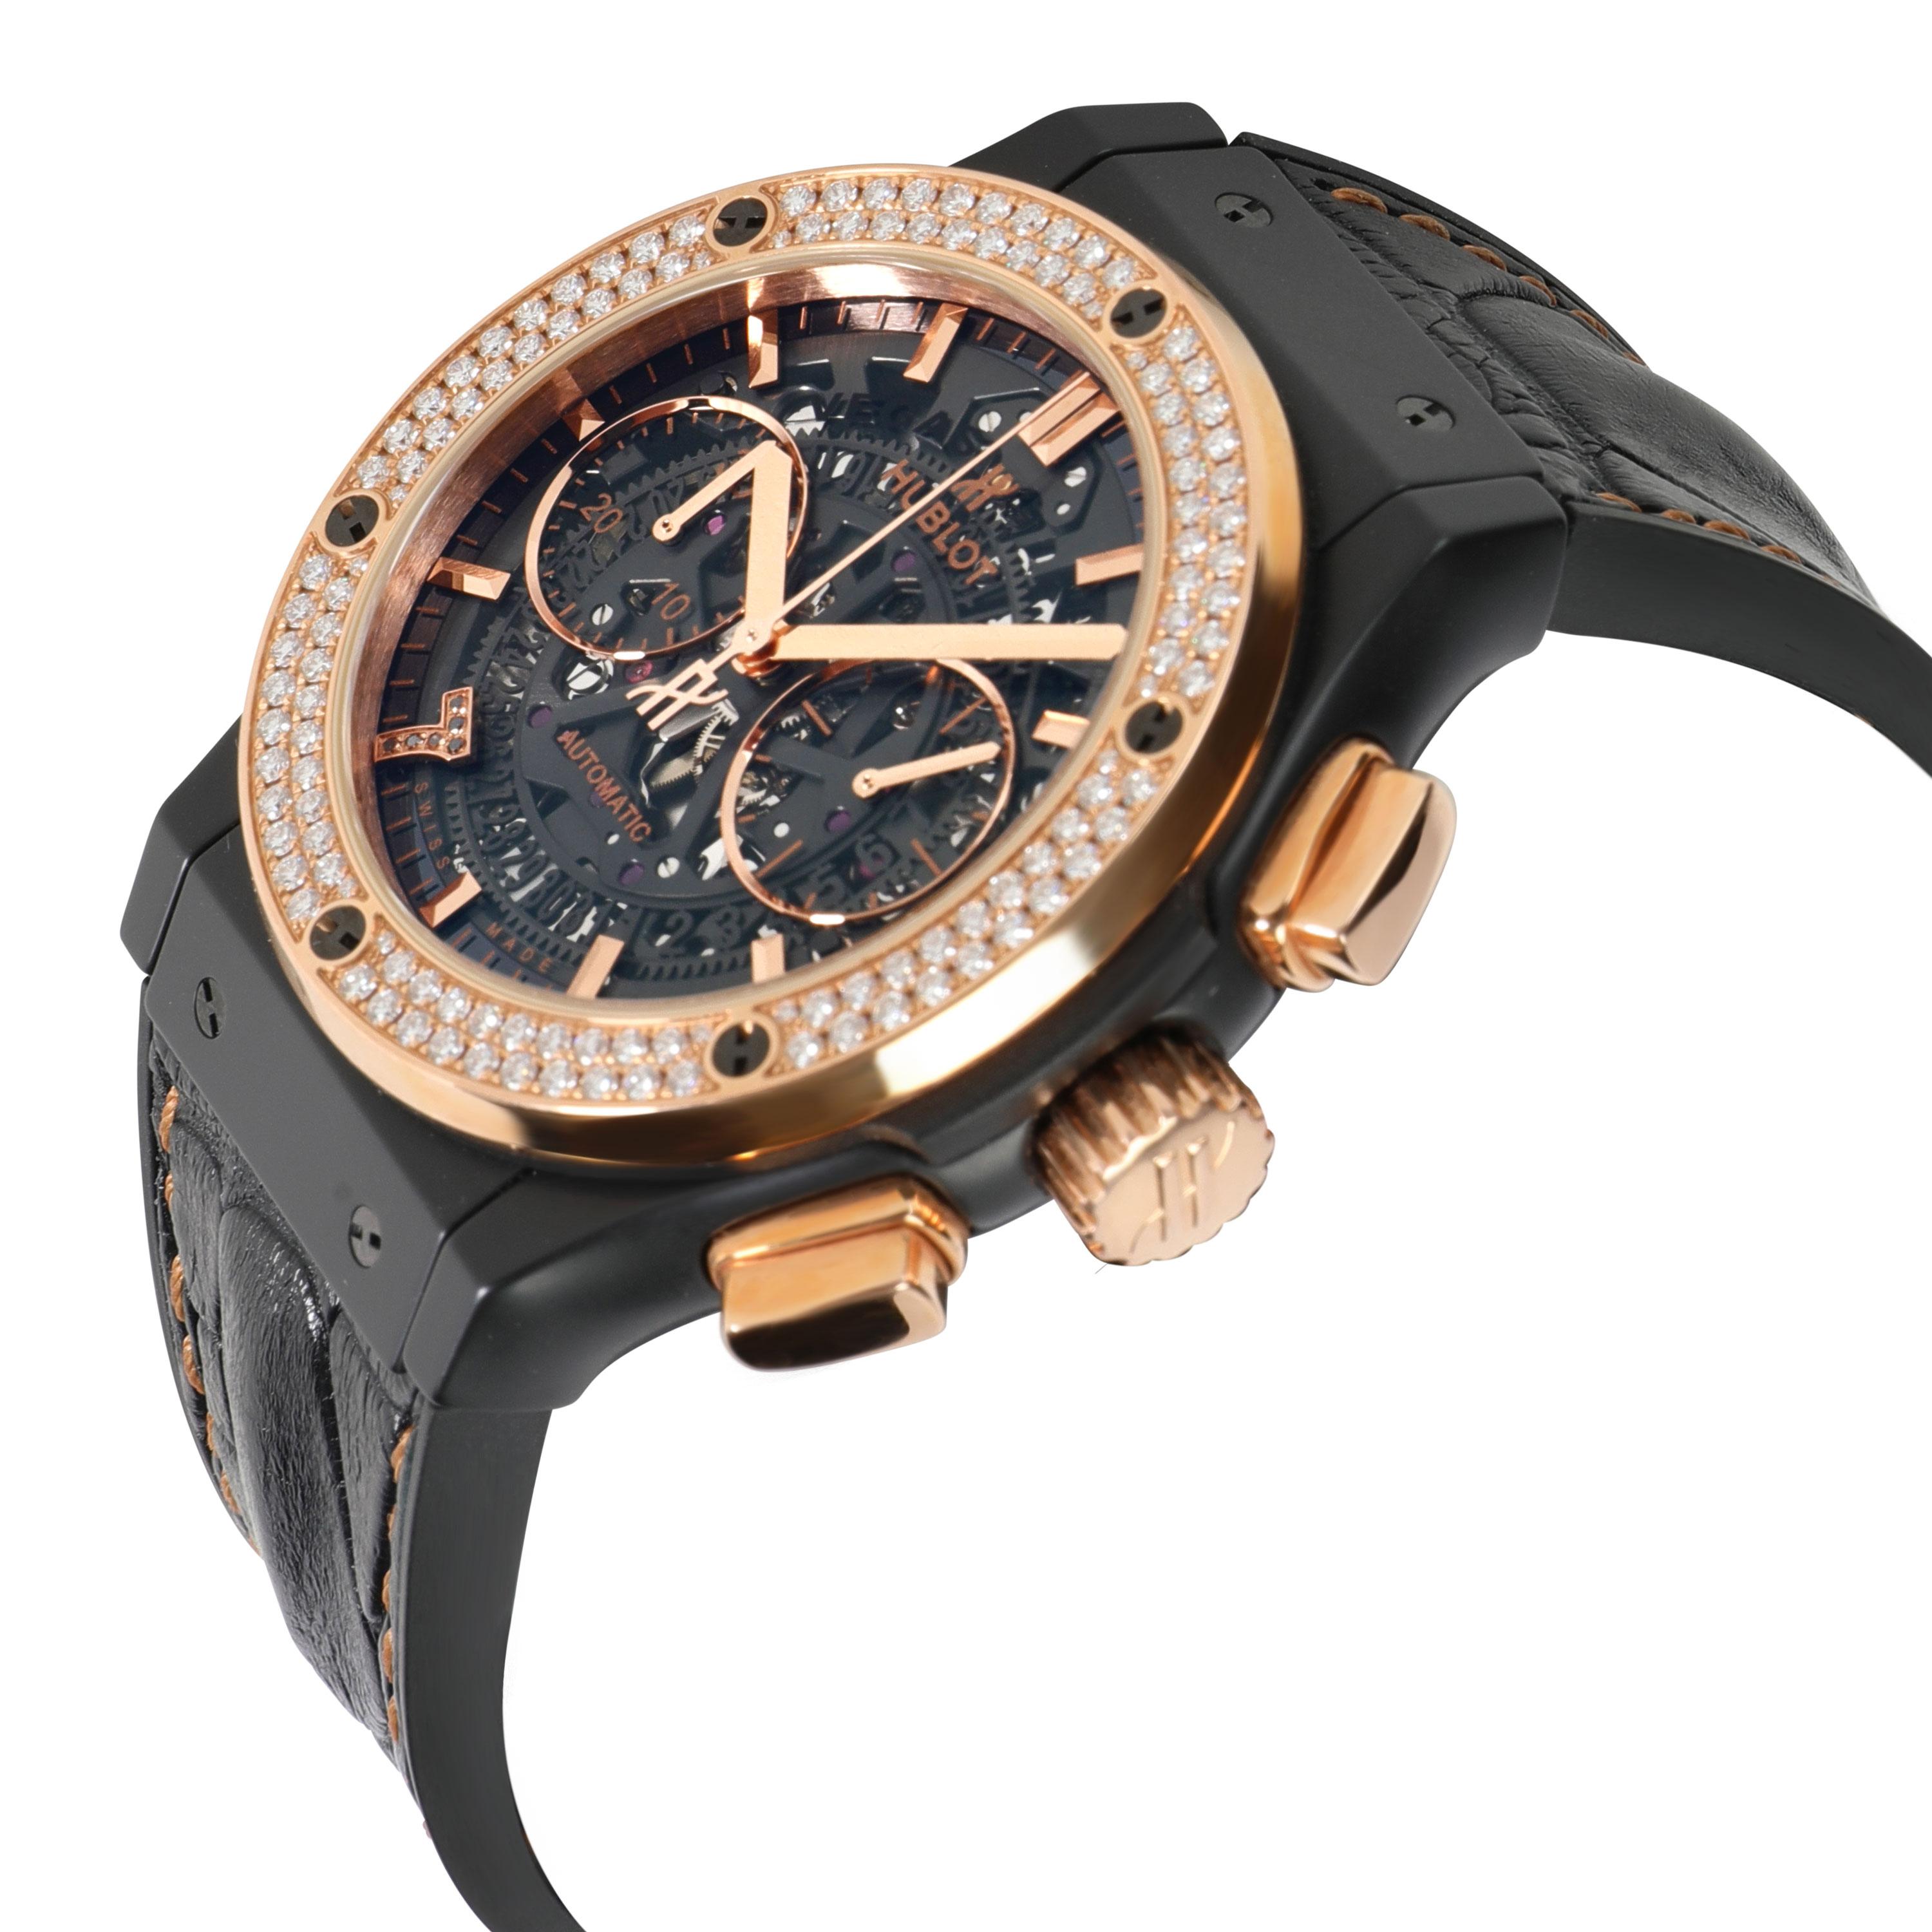 
Hublot Classic Fusion Vegas 525.CO.0181.HR.1104.LVB16 Men's Watch in 18kt Gold

SKU: 106539

PRIMARY DETAILS
Brand:  Hublot
Model: Classic Fusion Vegas
Country of Origin: Switzerland
Movement Type: Mechanical: Automatic/Kinetic
Year Manufactured: